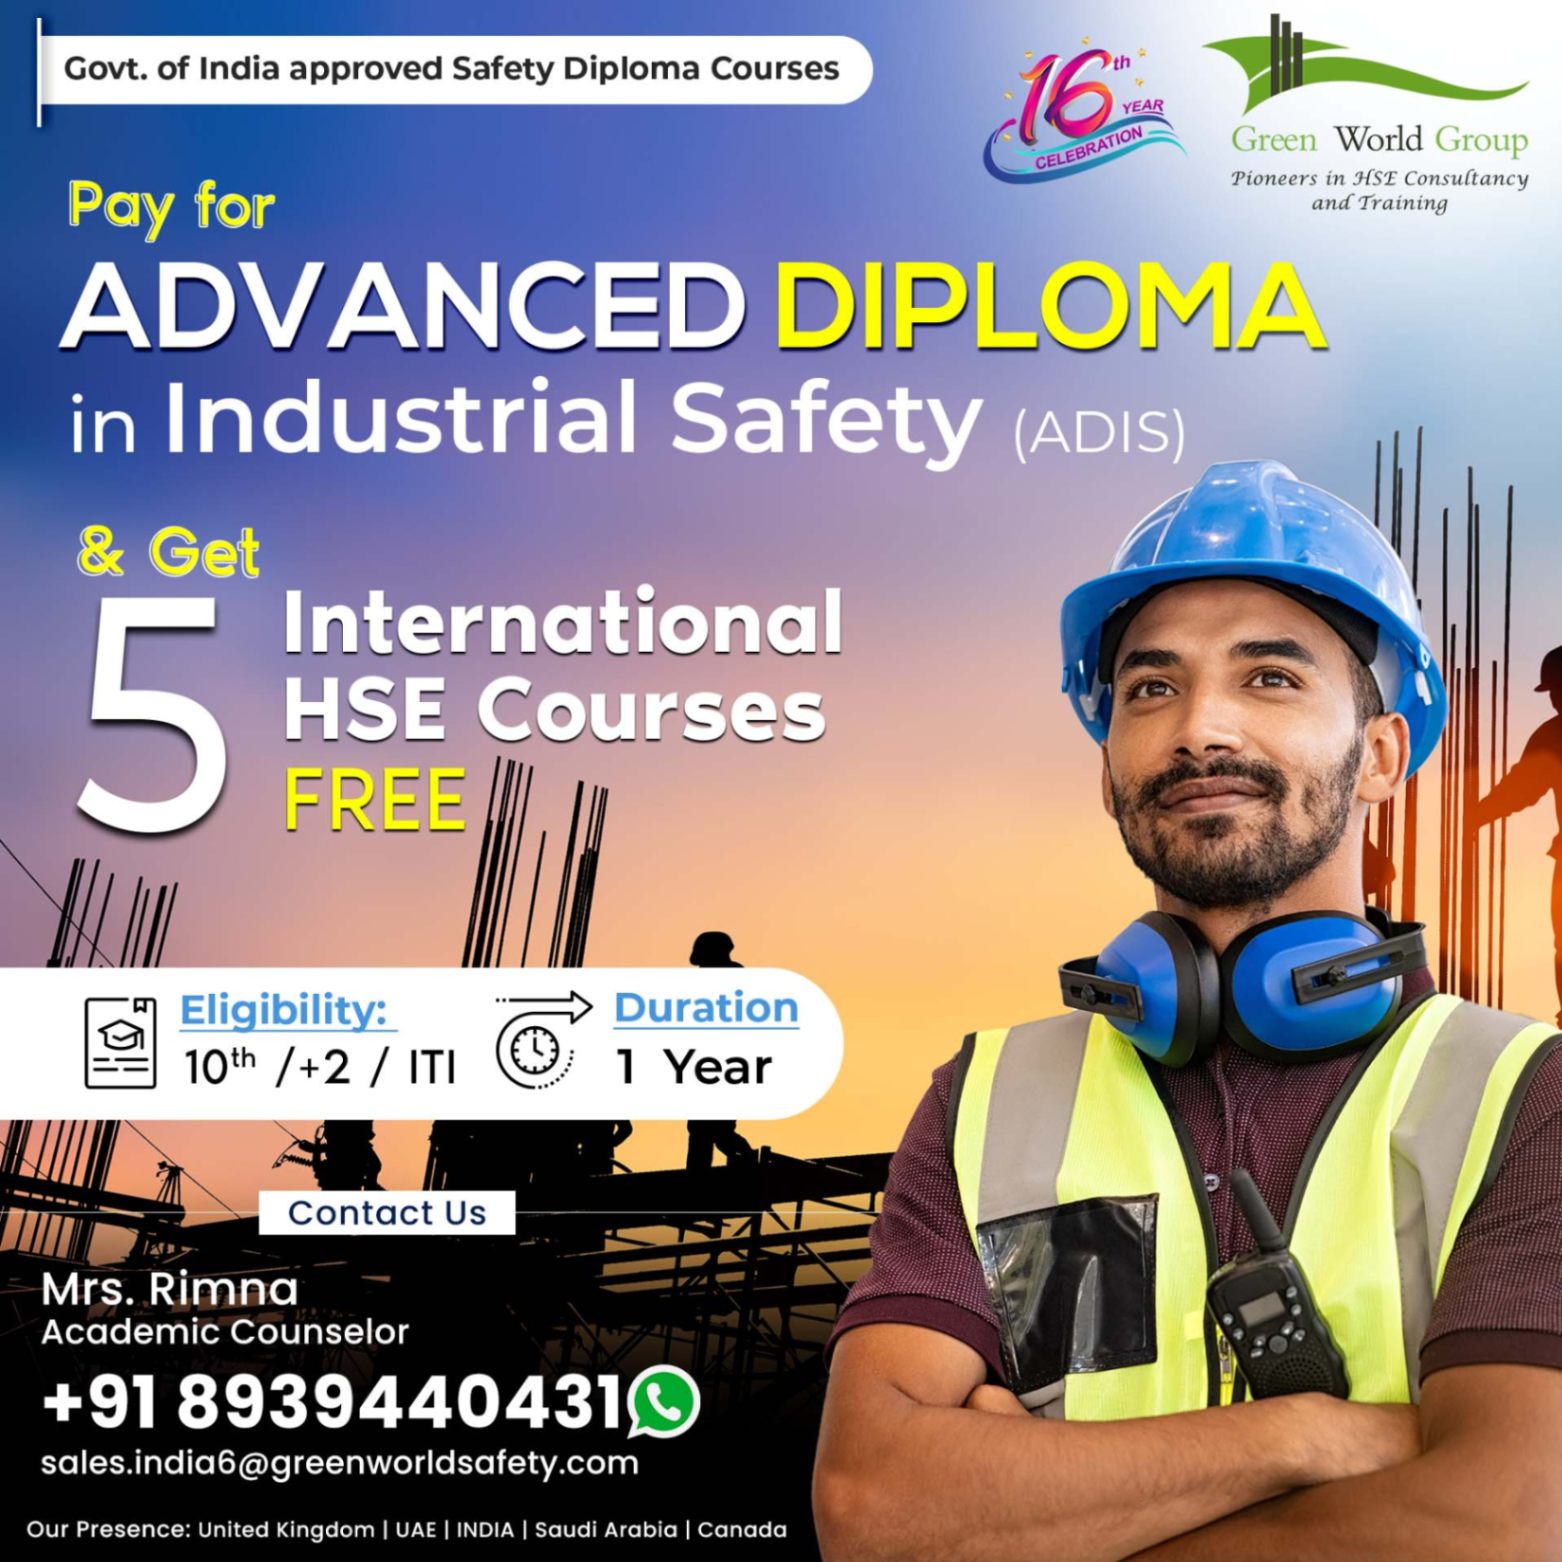 Green World’s Exciting Offer on Industrial Safety Diploma